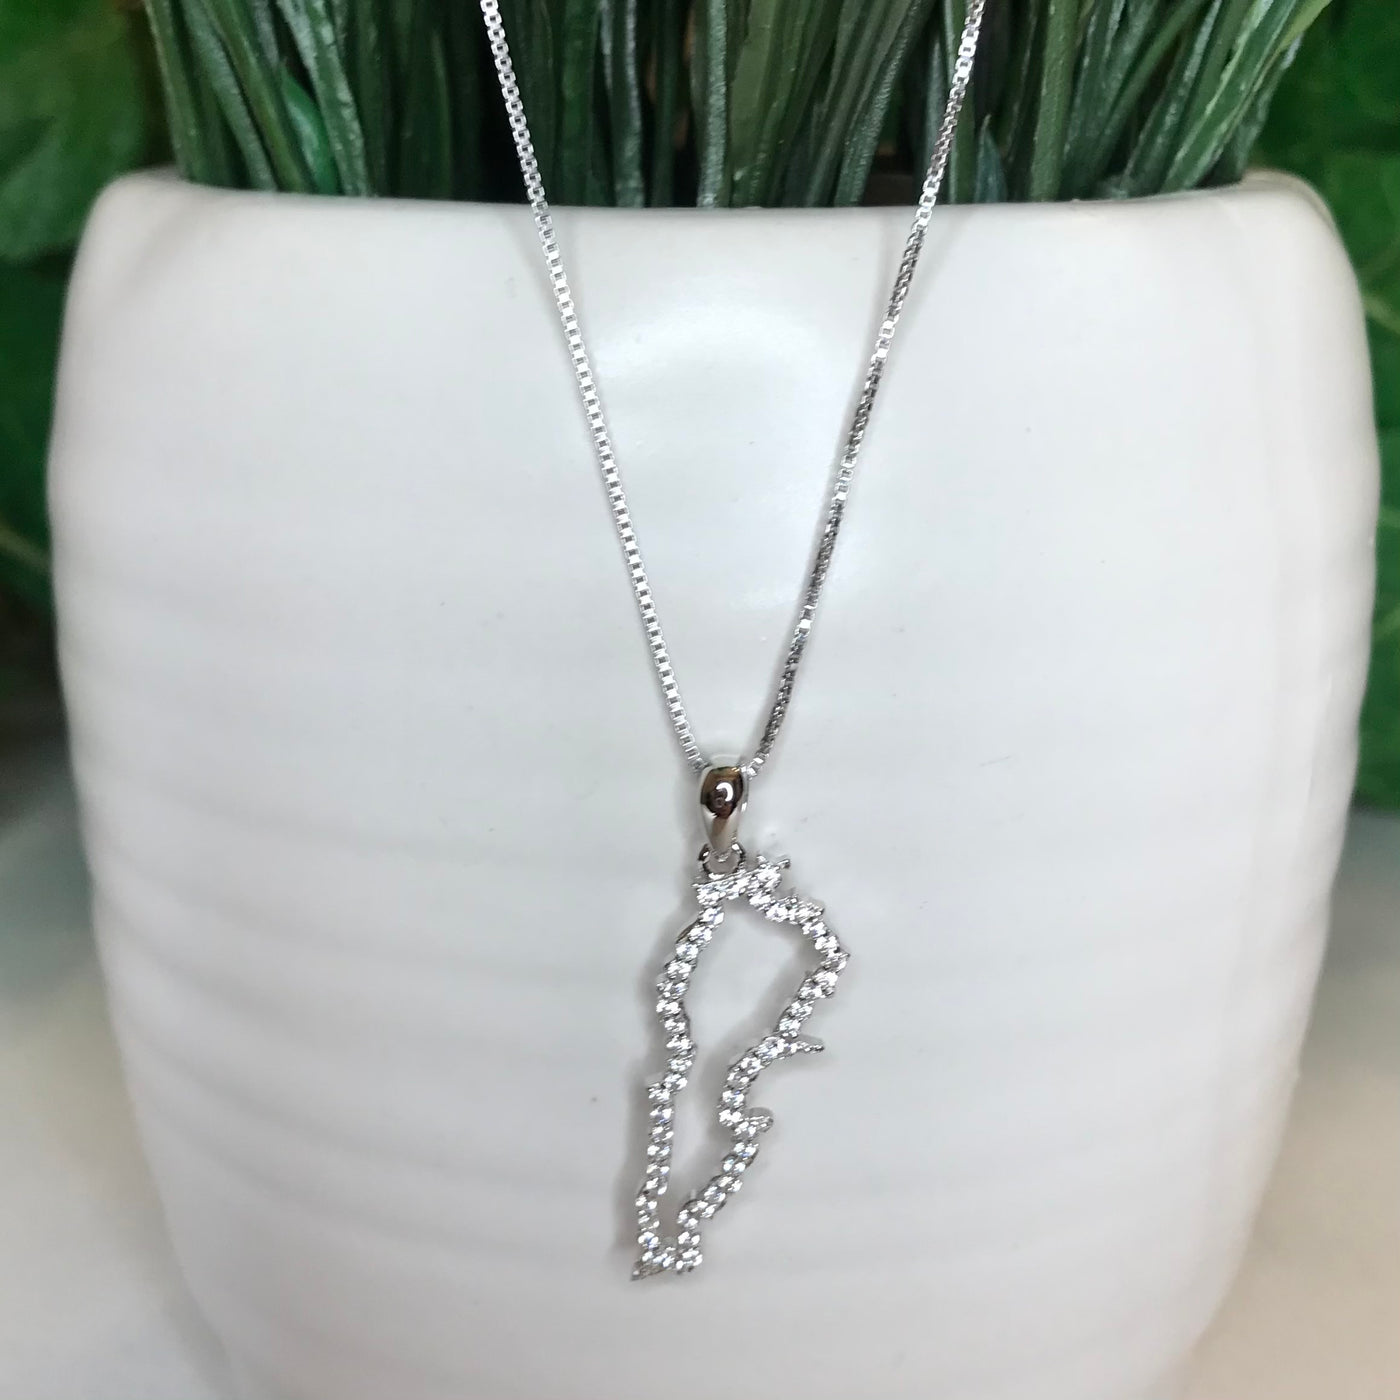 Sterling Silver Lebanon Map CZ Outline Necklace - Available in 3 Colors